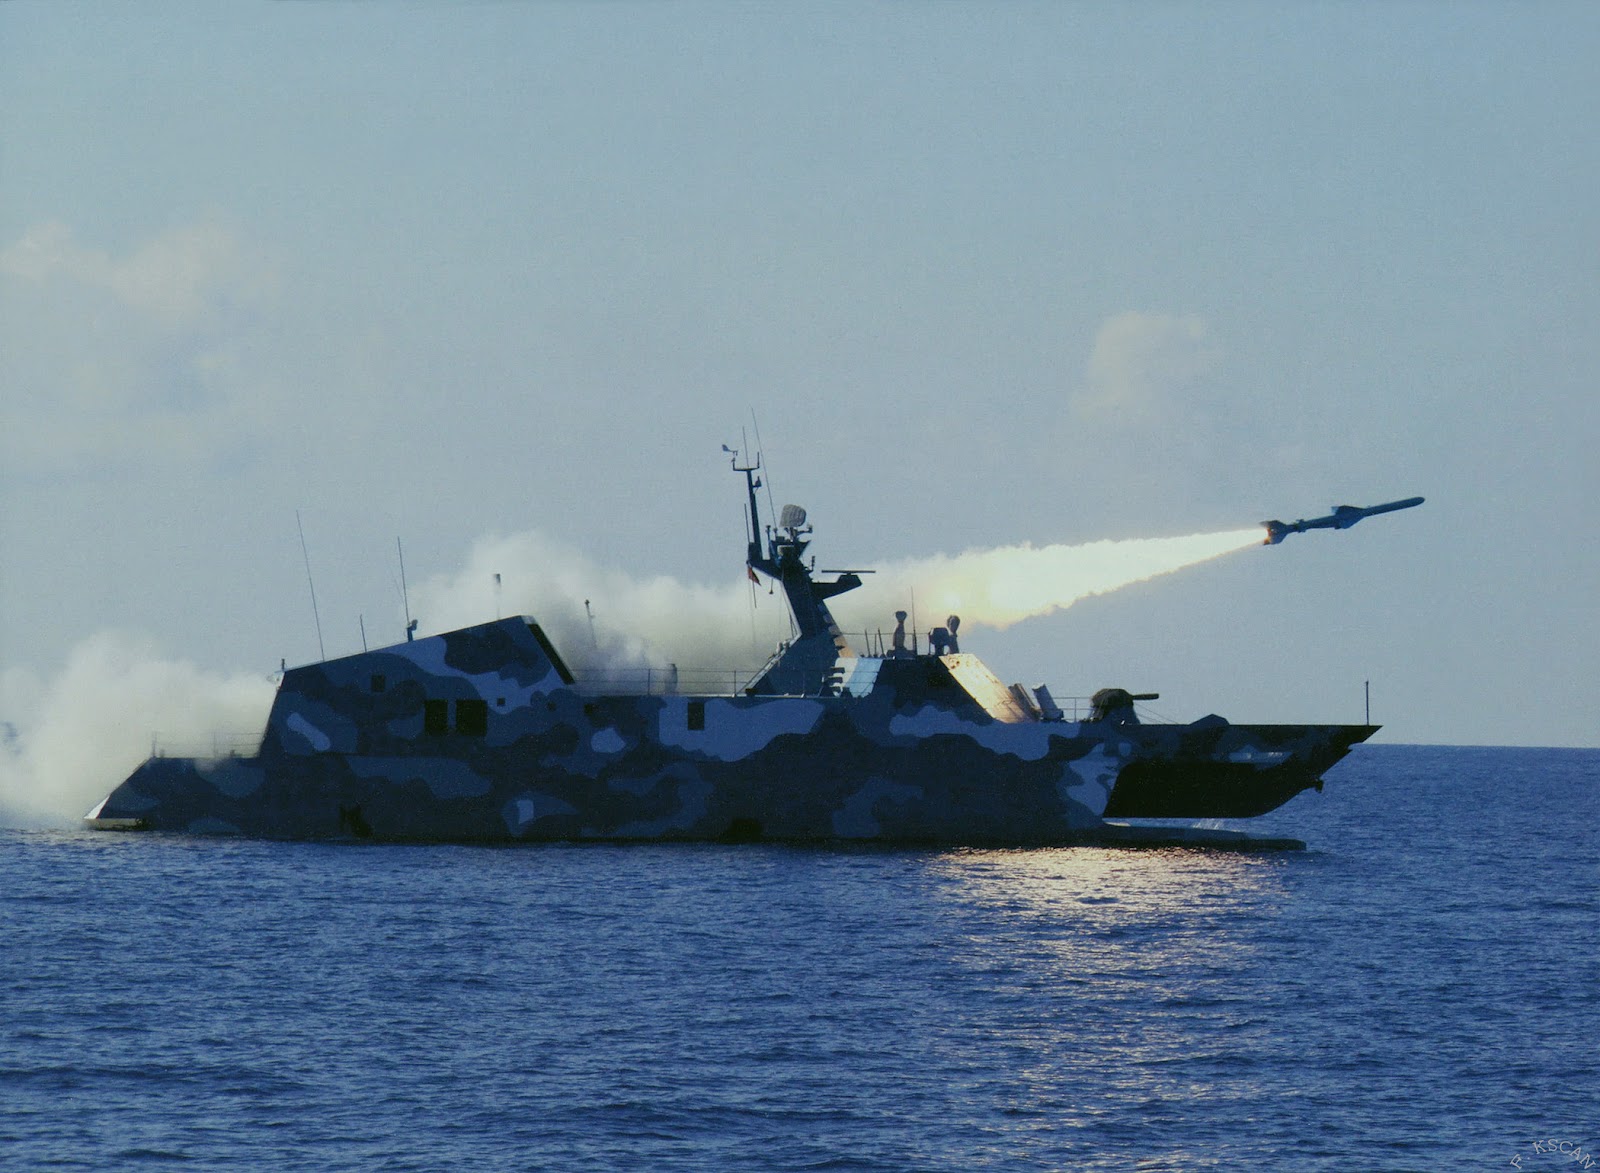 Long range anti-ship missiles contribute to an essential element of China's deterrence.